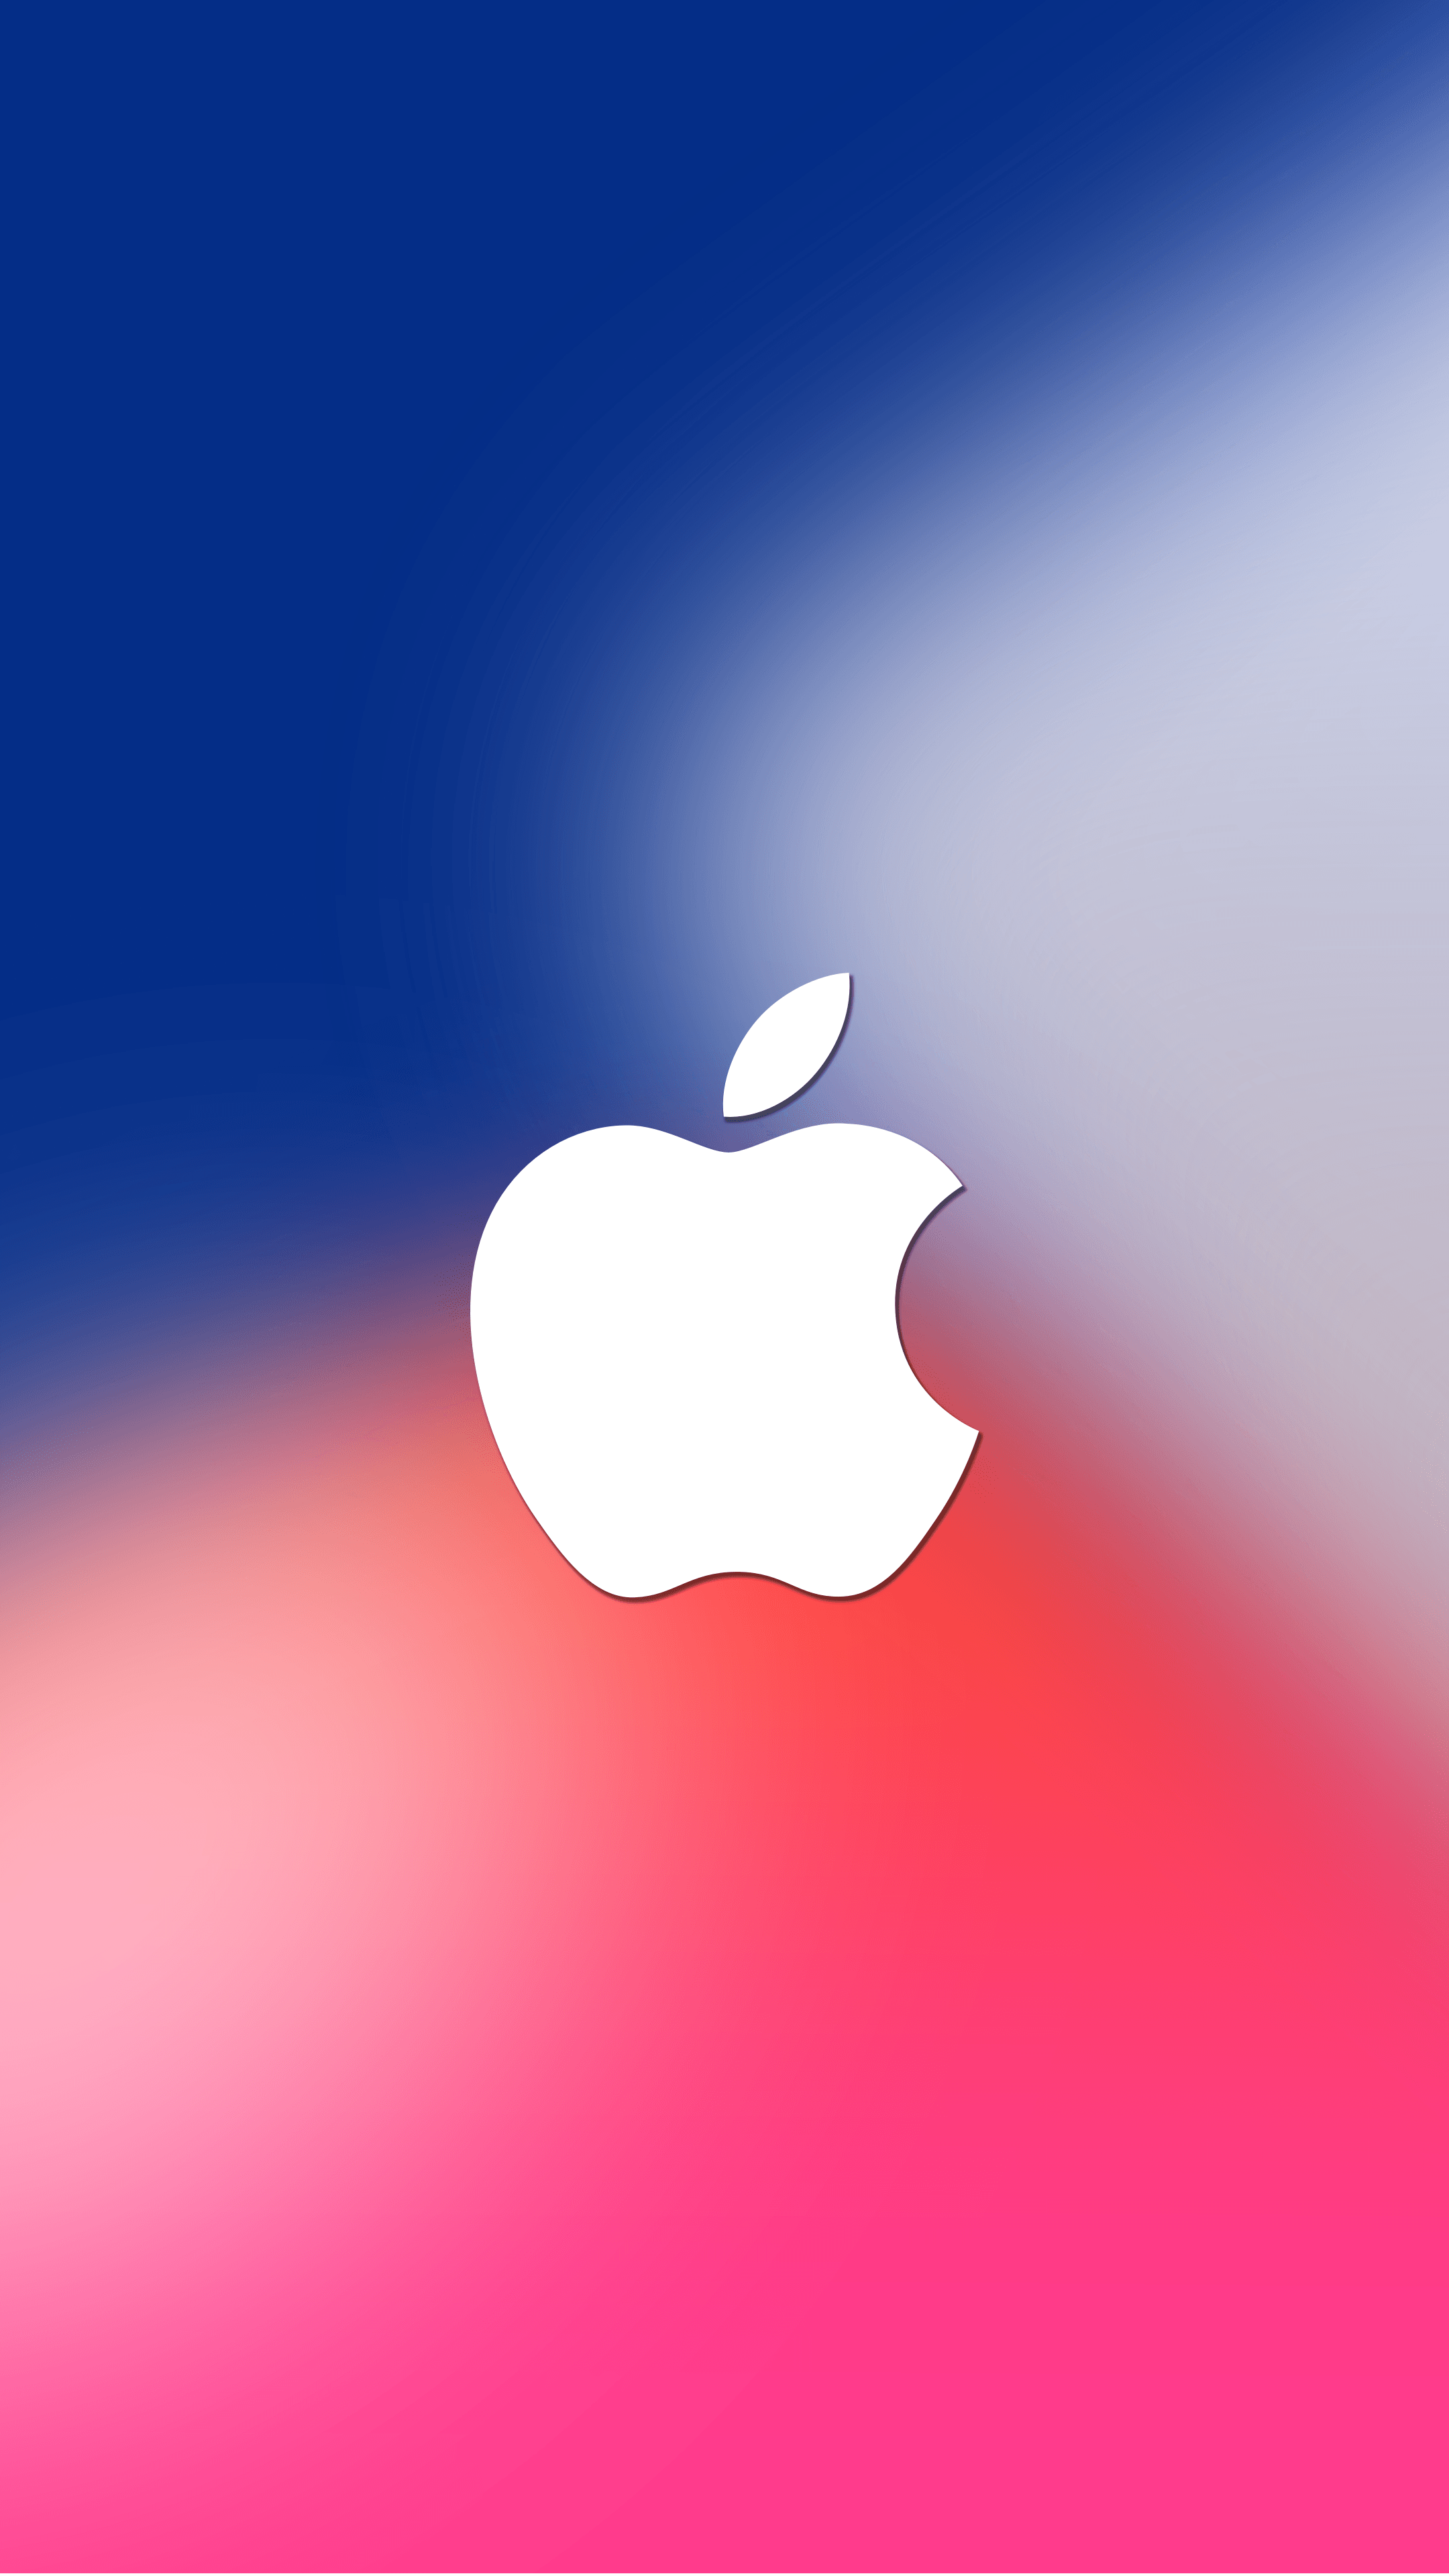 Cool Apple Logo Iphone Wallpapers Wallpapers